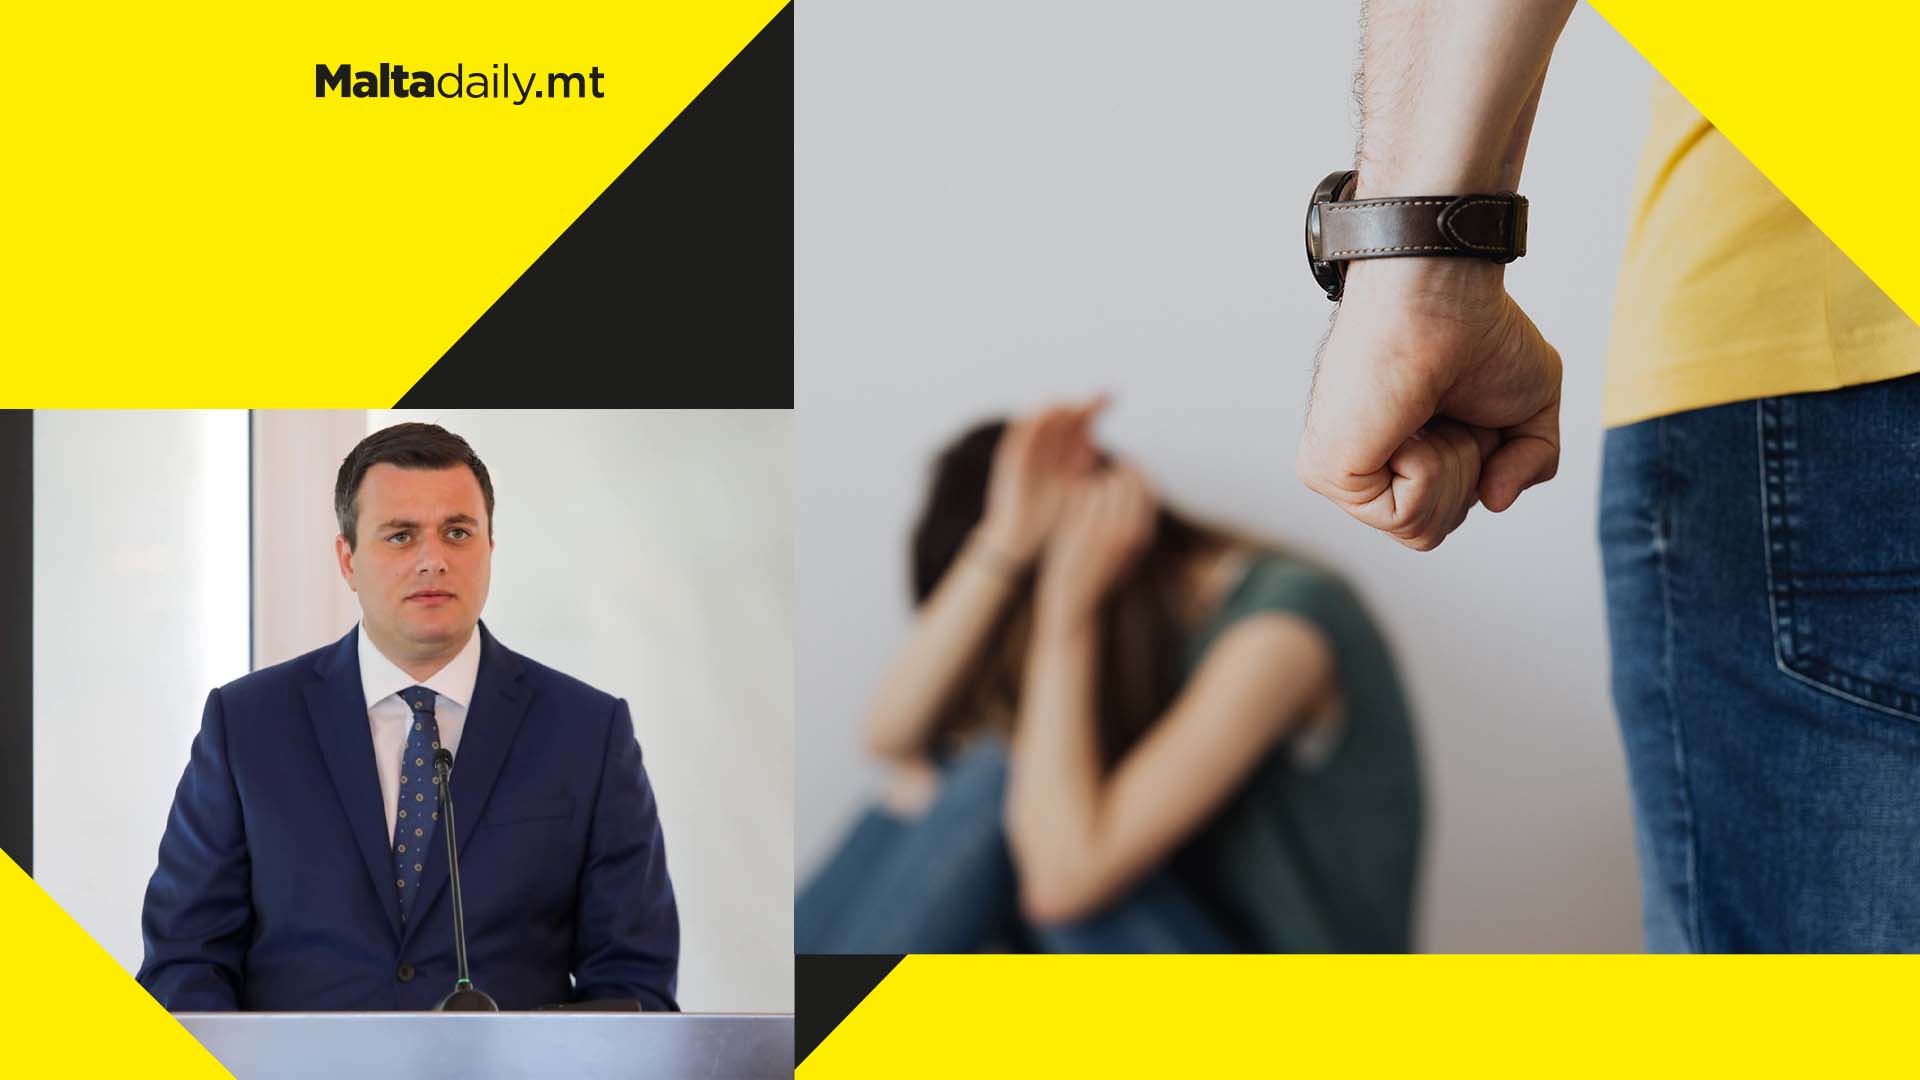 1,414 reports of domestic violence in Malta between January & October